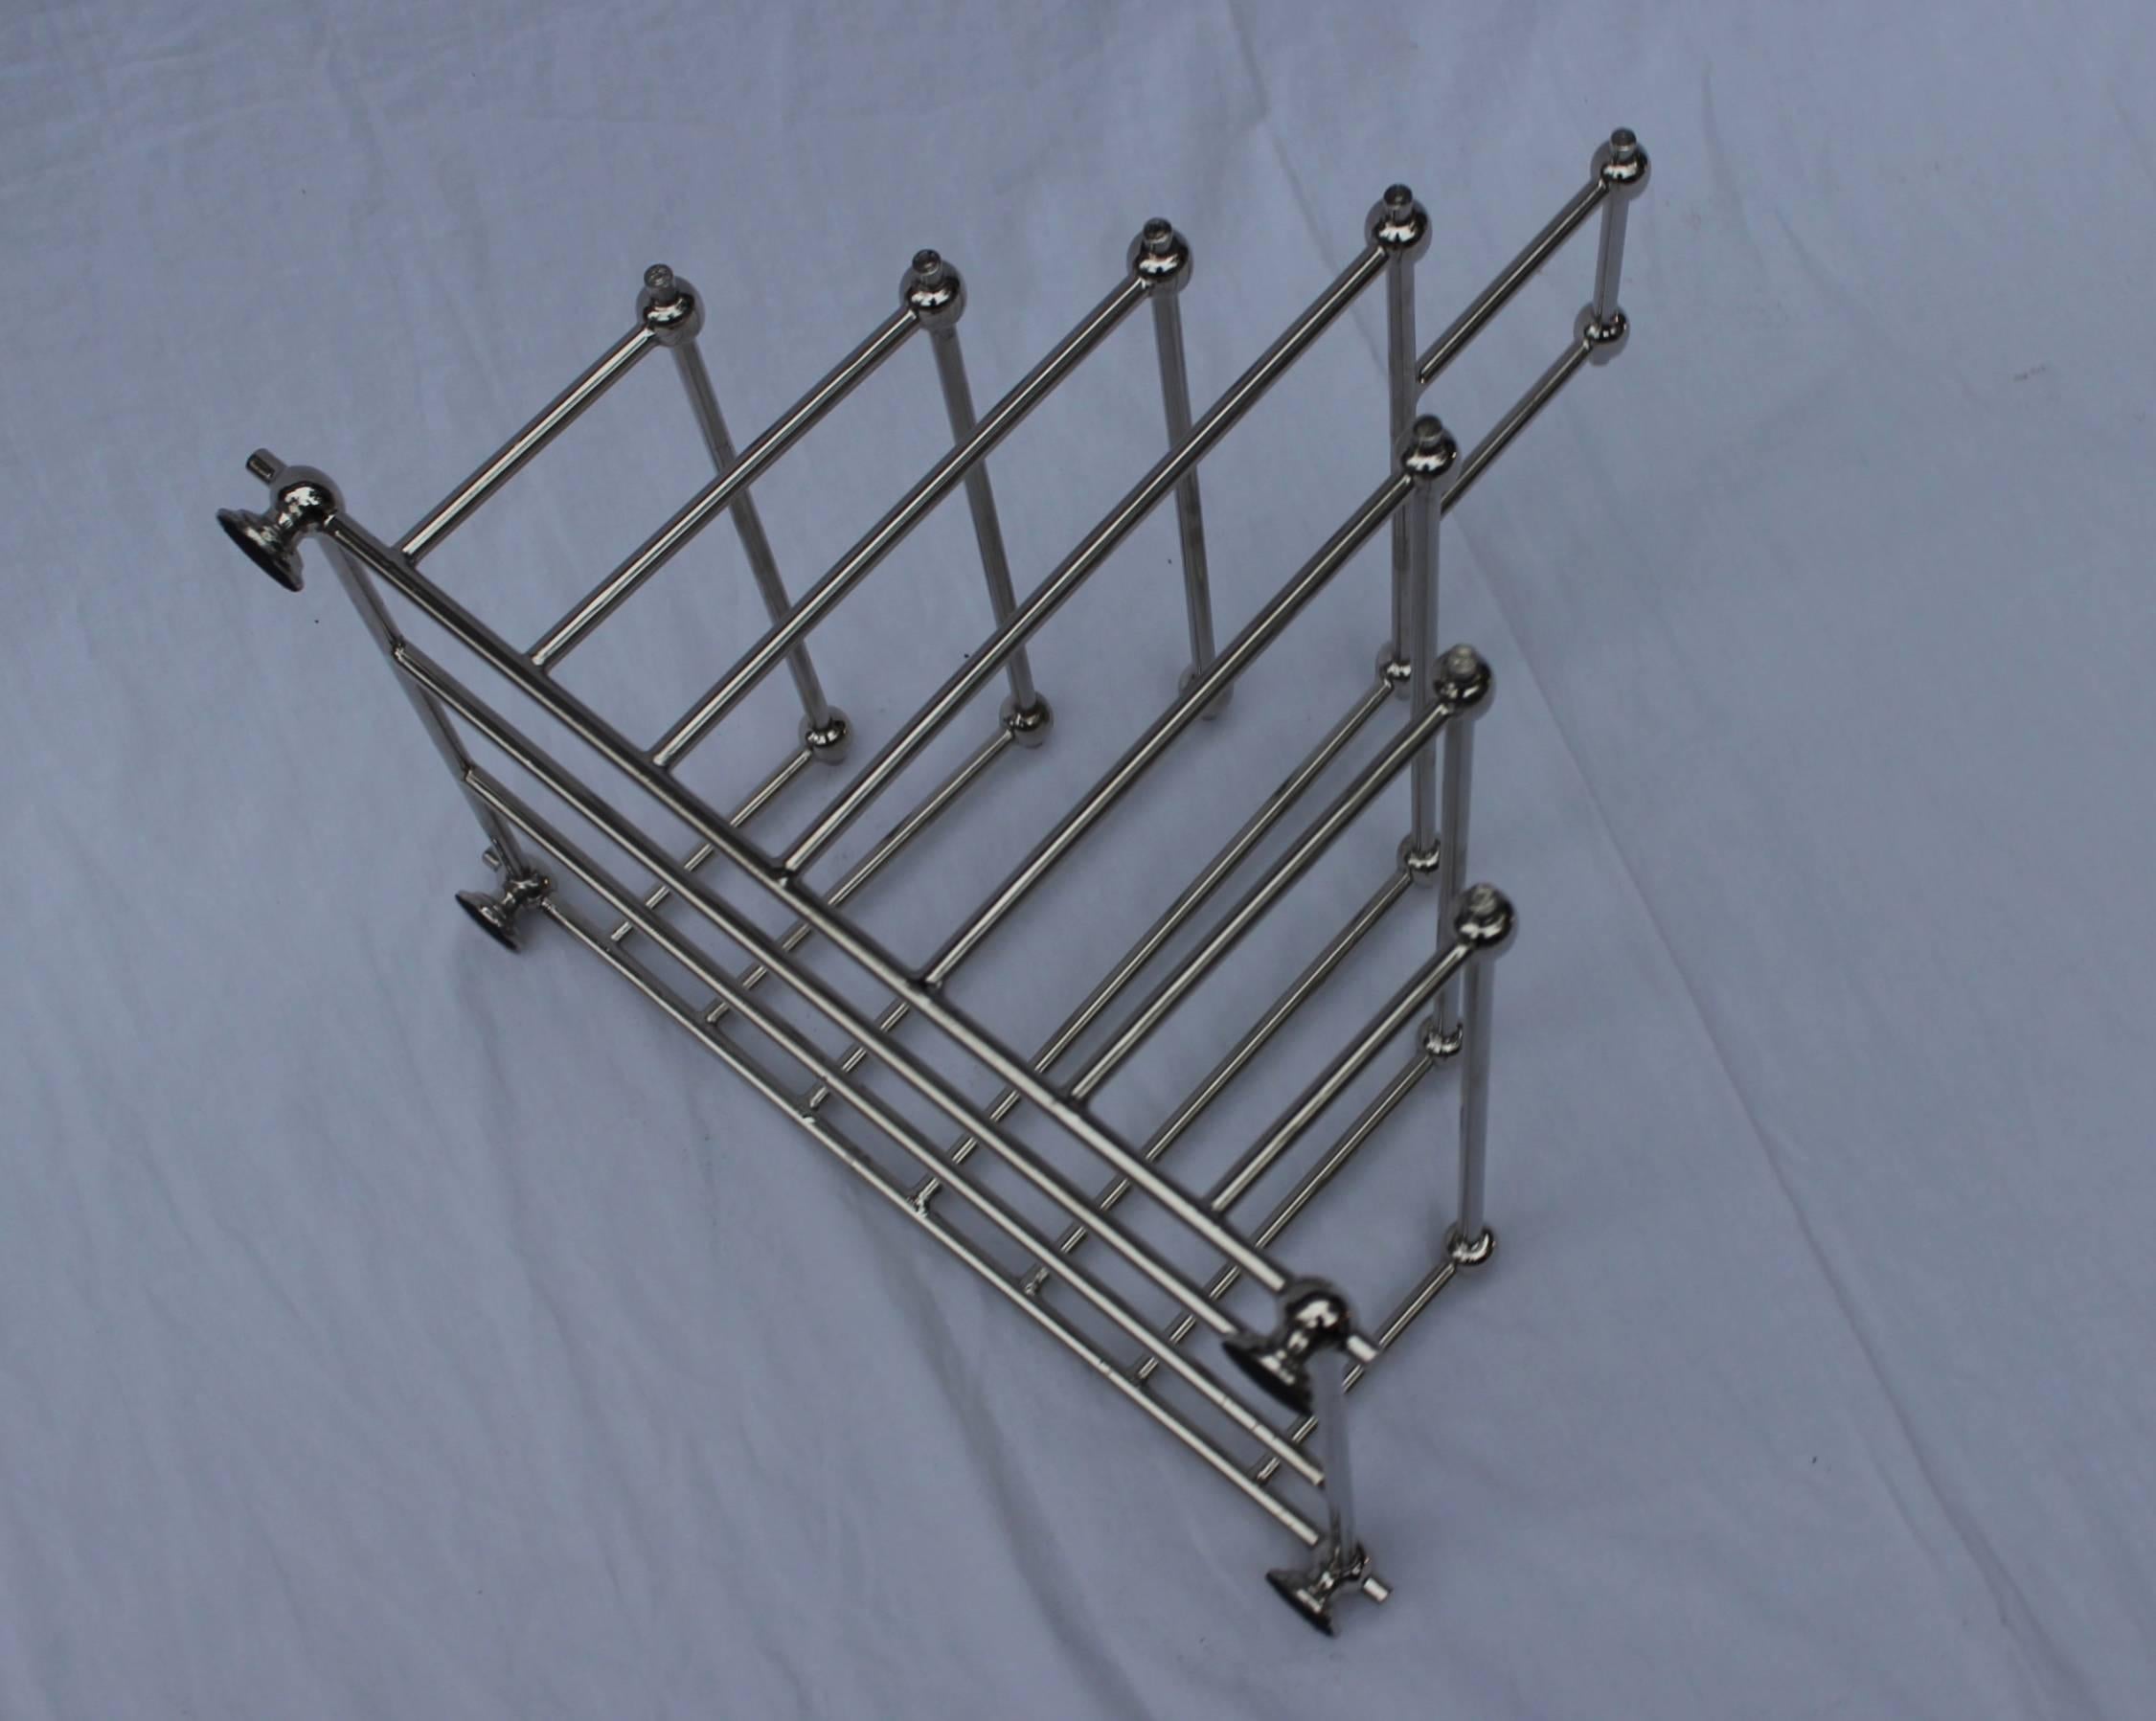 1980s Chrome Magazine Holder In Excellent Condition For Sale In New York, NY